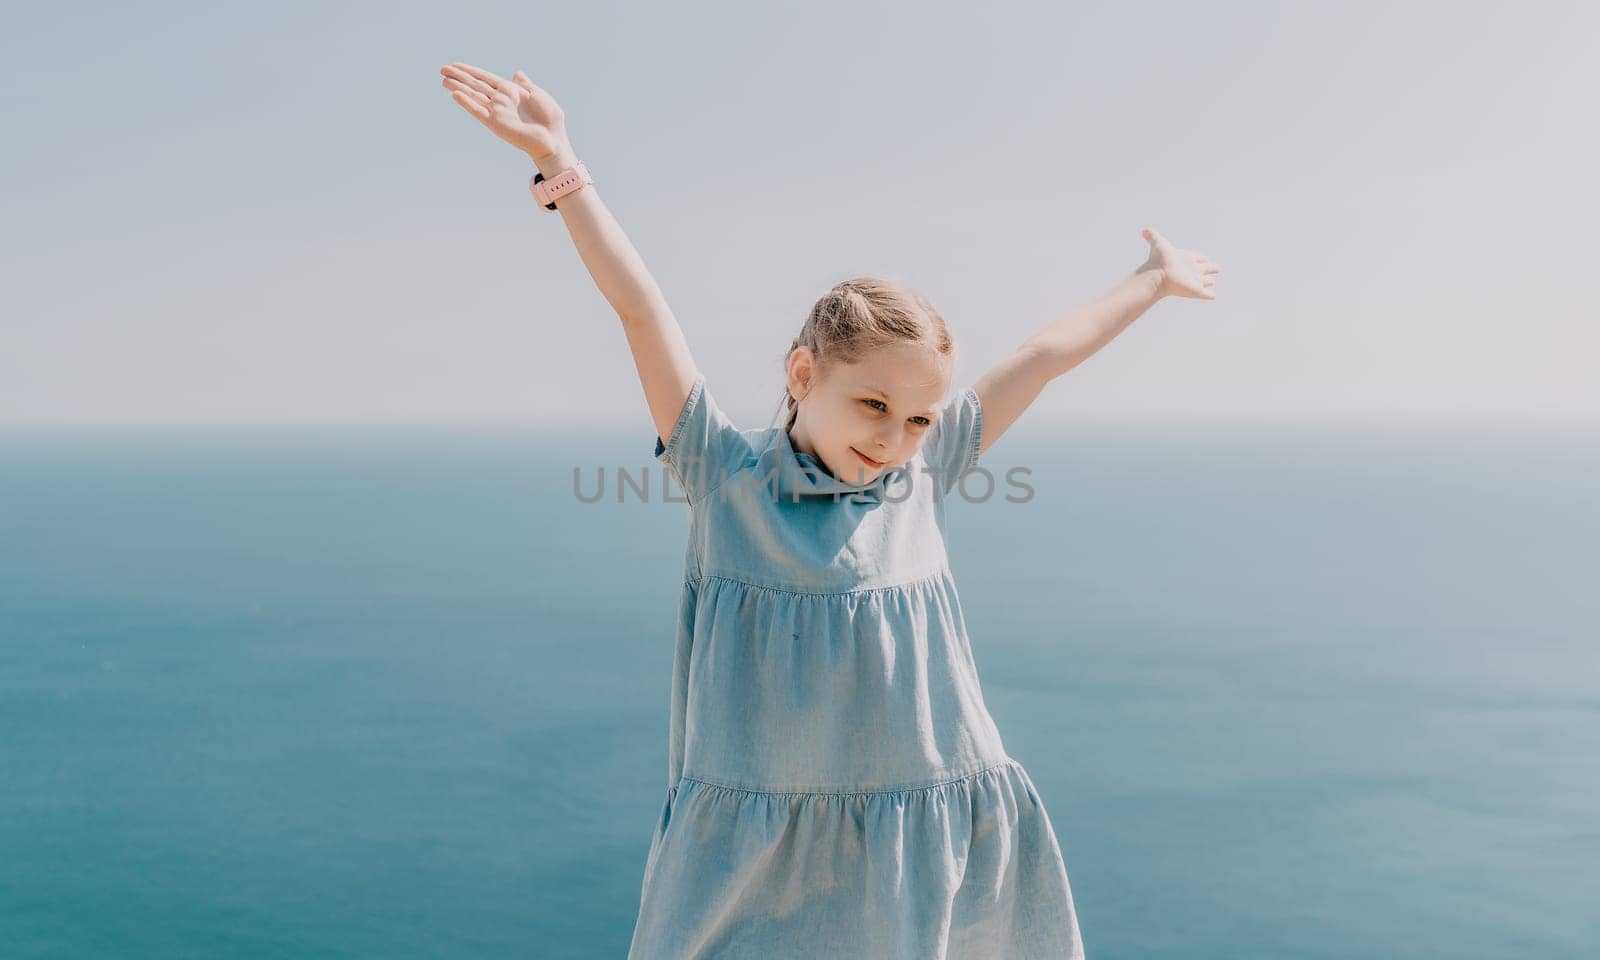 A young girl is standing on a beach, wearing a blue dress and holding her arms up in the air. Concept of joy and freedom, as the girl appears to be enjoying her time by the ocean